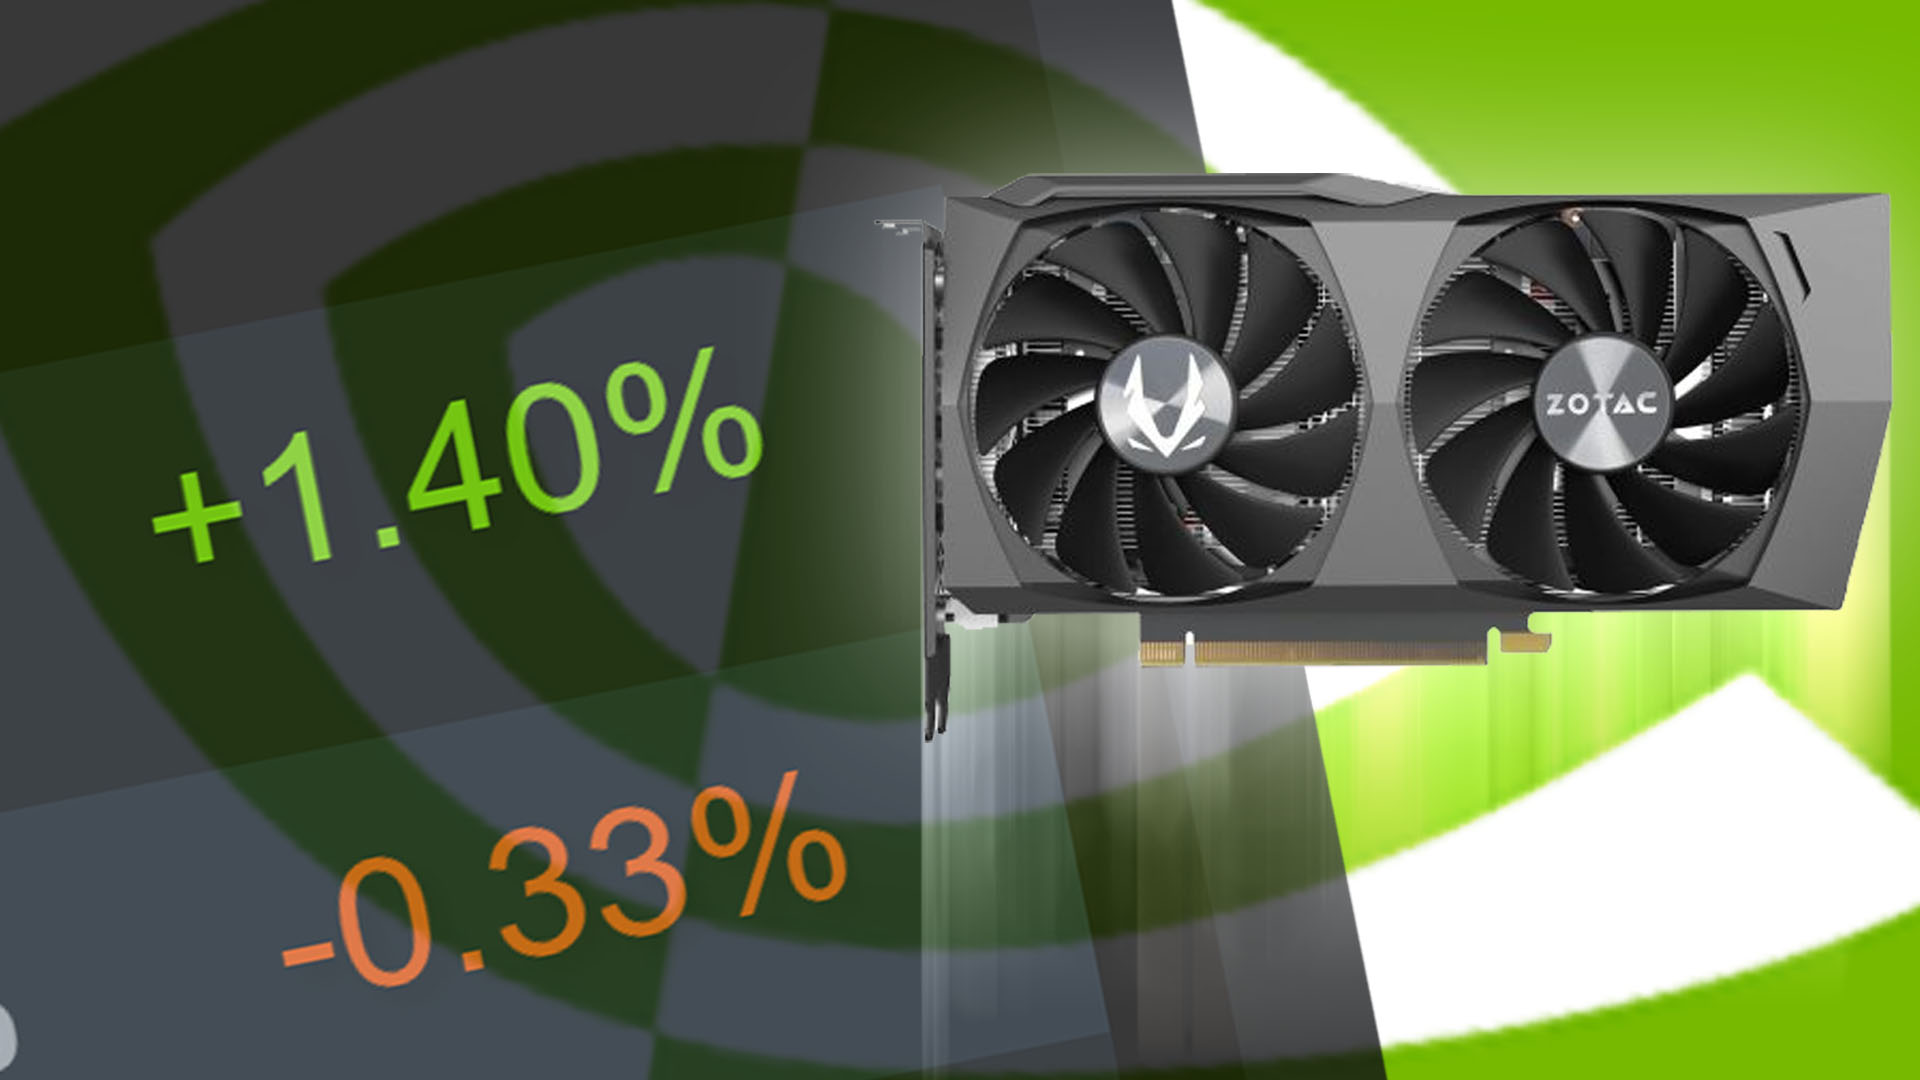 NVIDIA GeForce GTX 1650 is now the most popular GPU according to